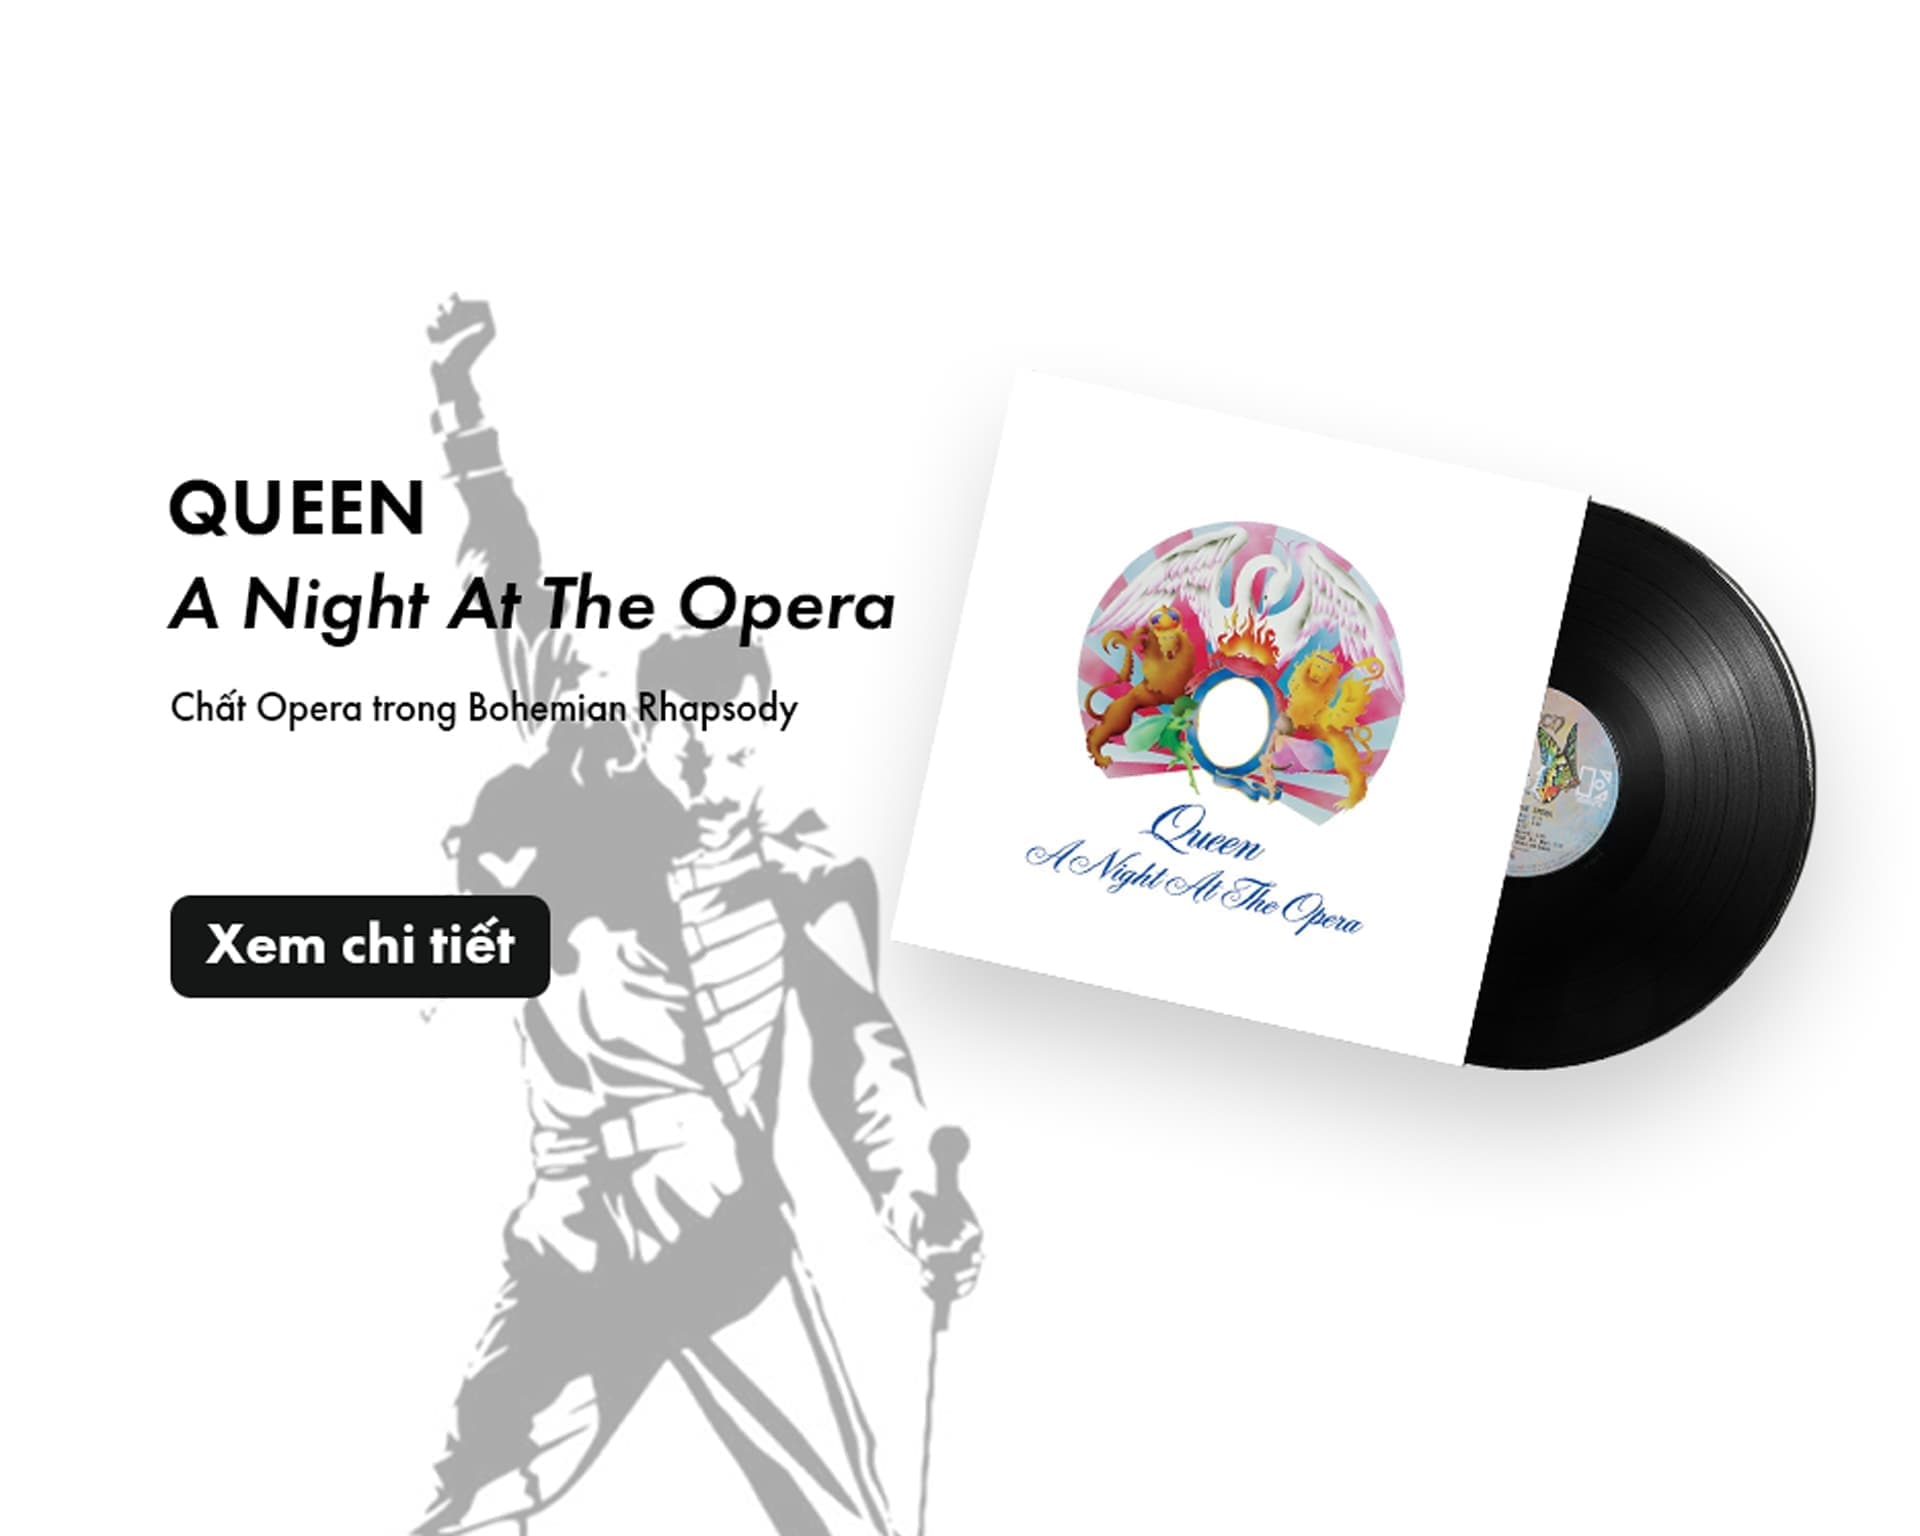 https://vocrecords.vn/product/queen-a-night-at-the-opera/